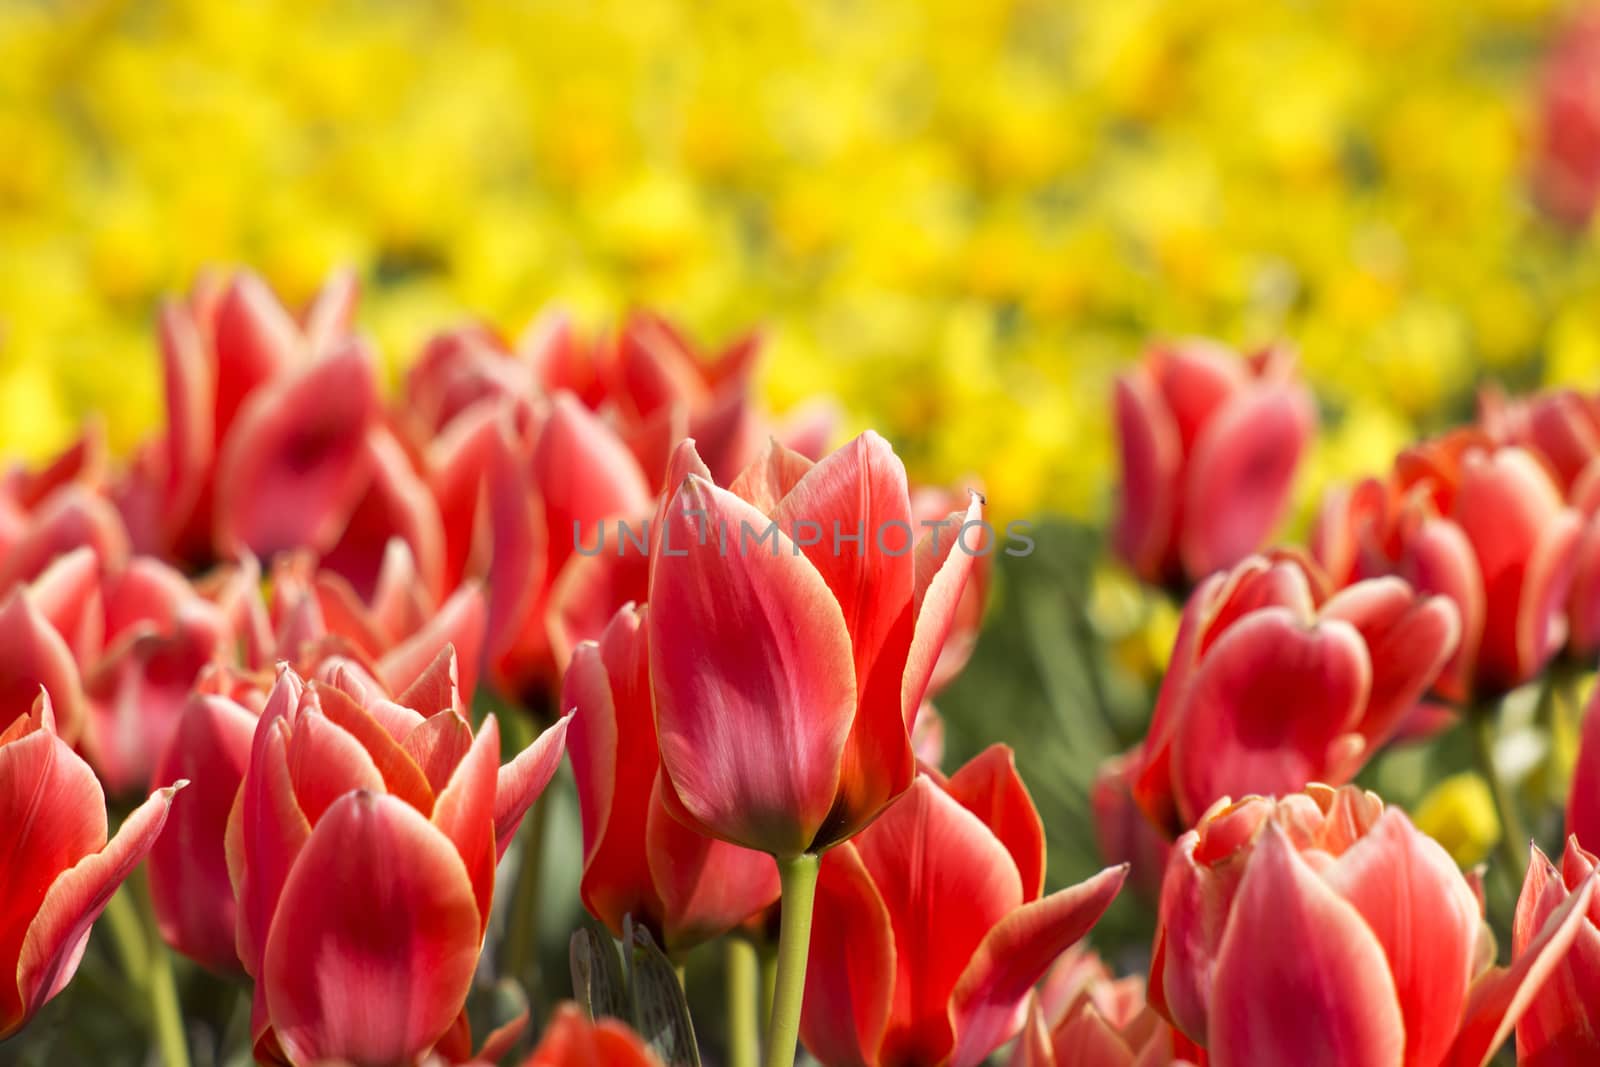 A spring field with red tulips by miradrozdowski